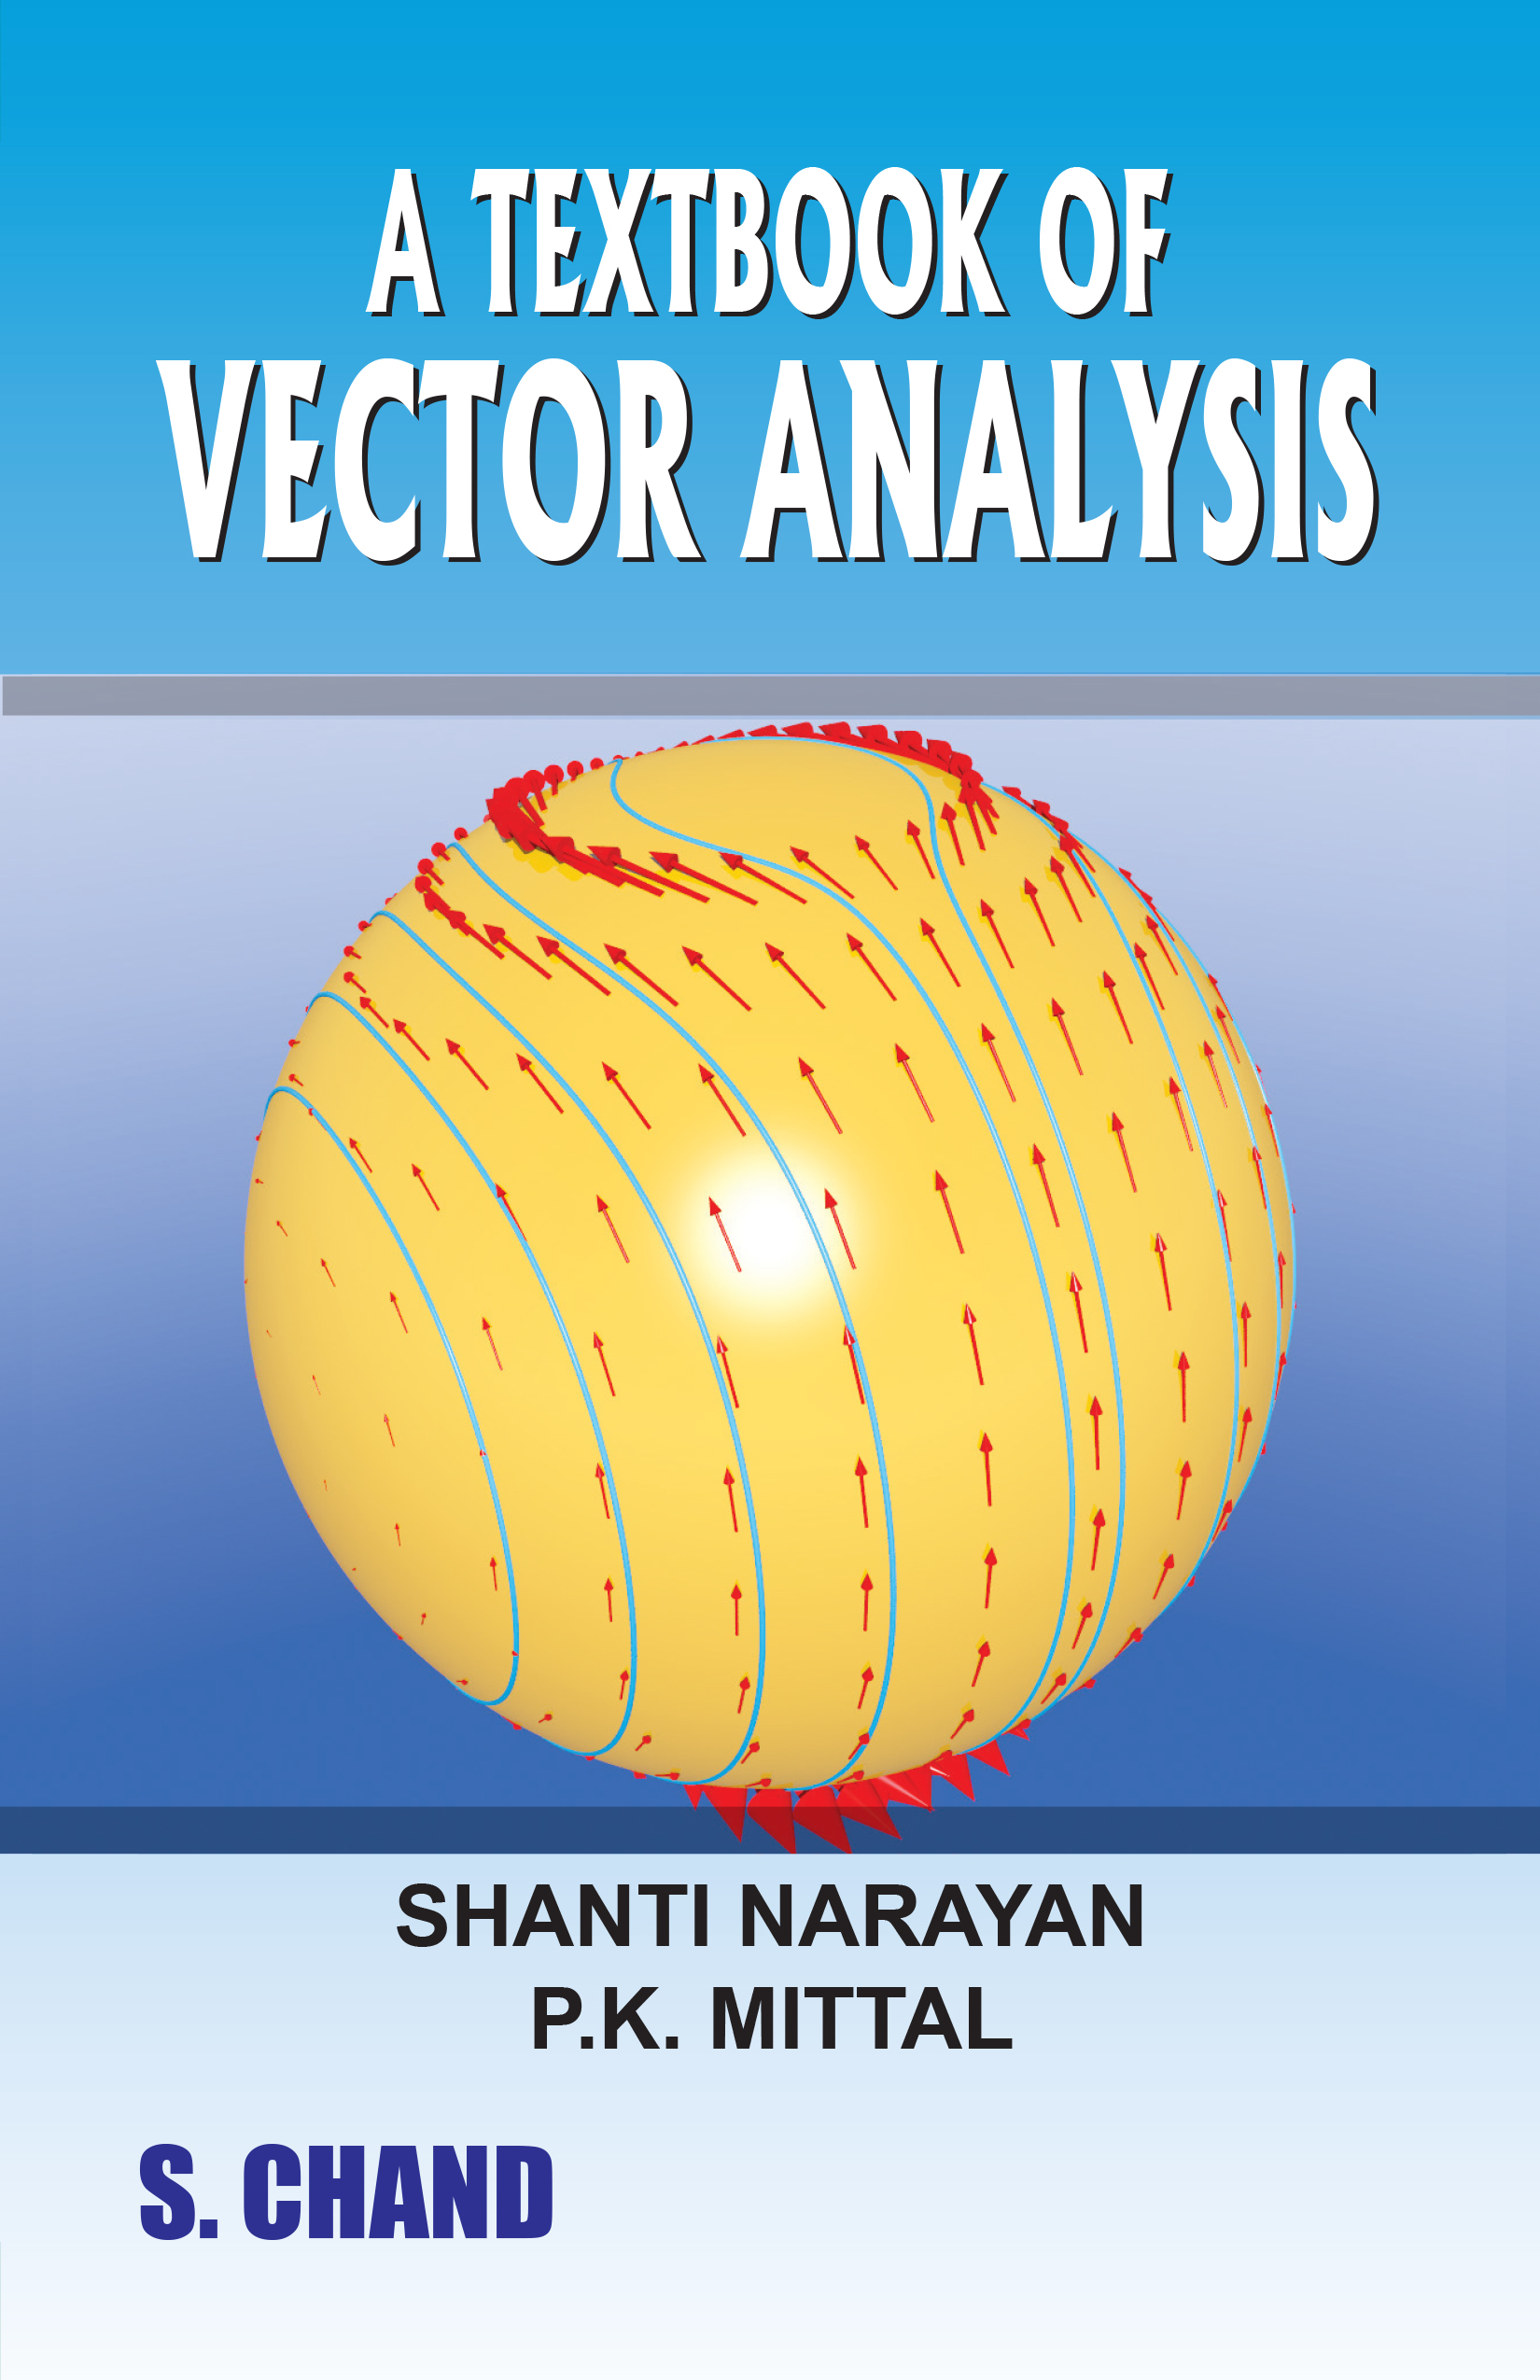 A Textbook of Vector Analysis